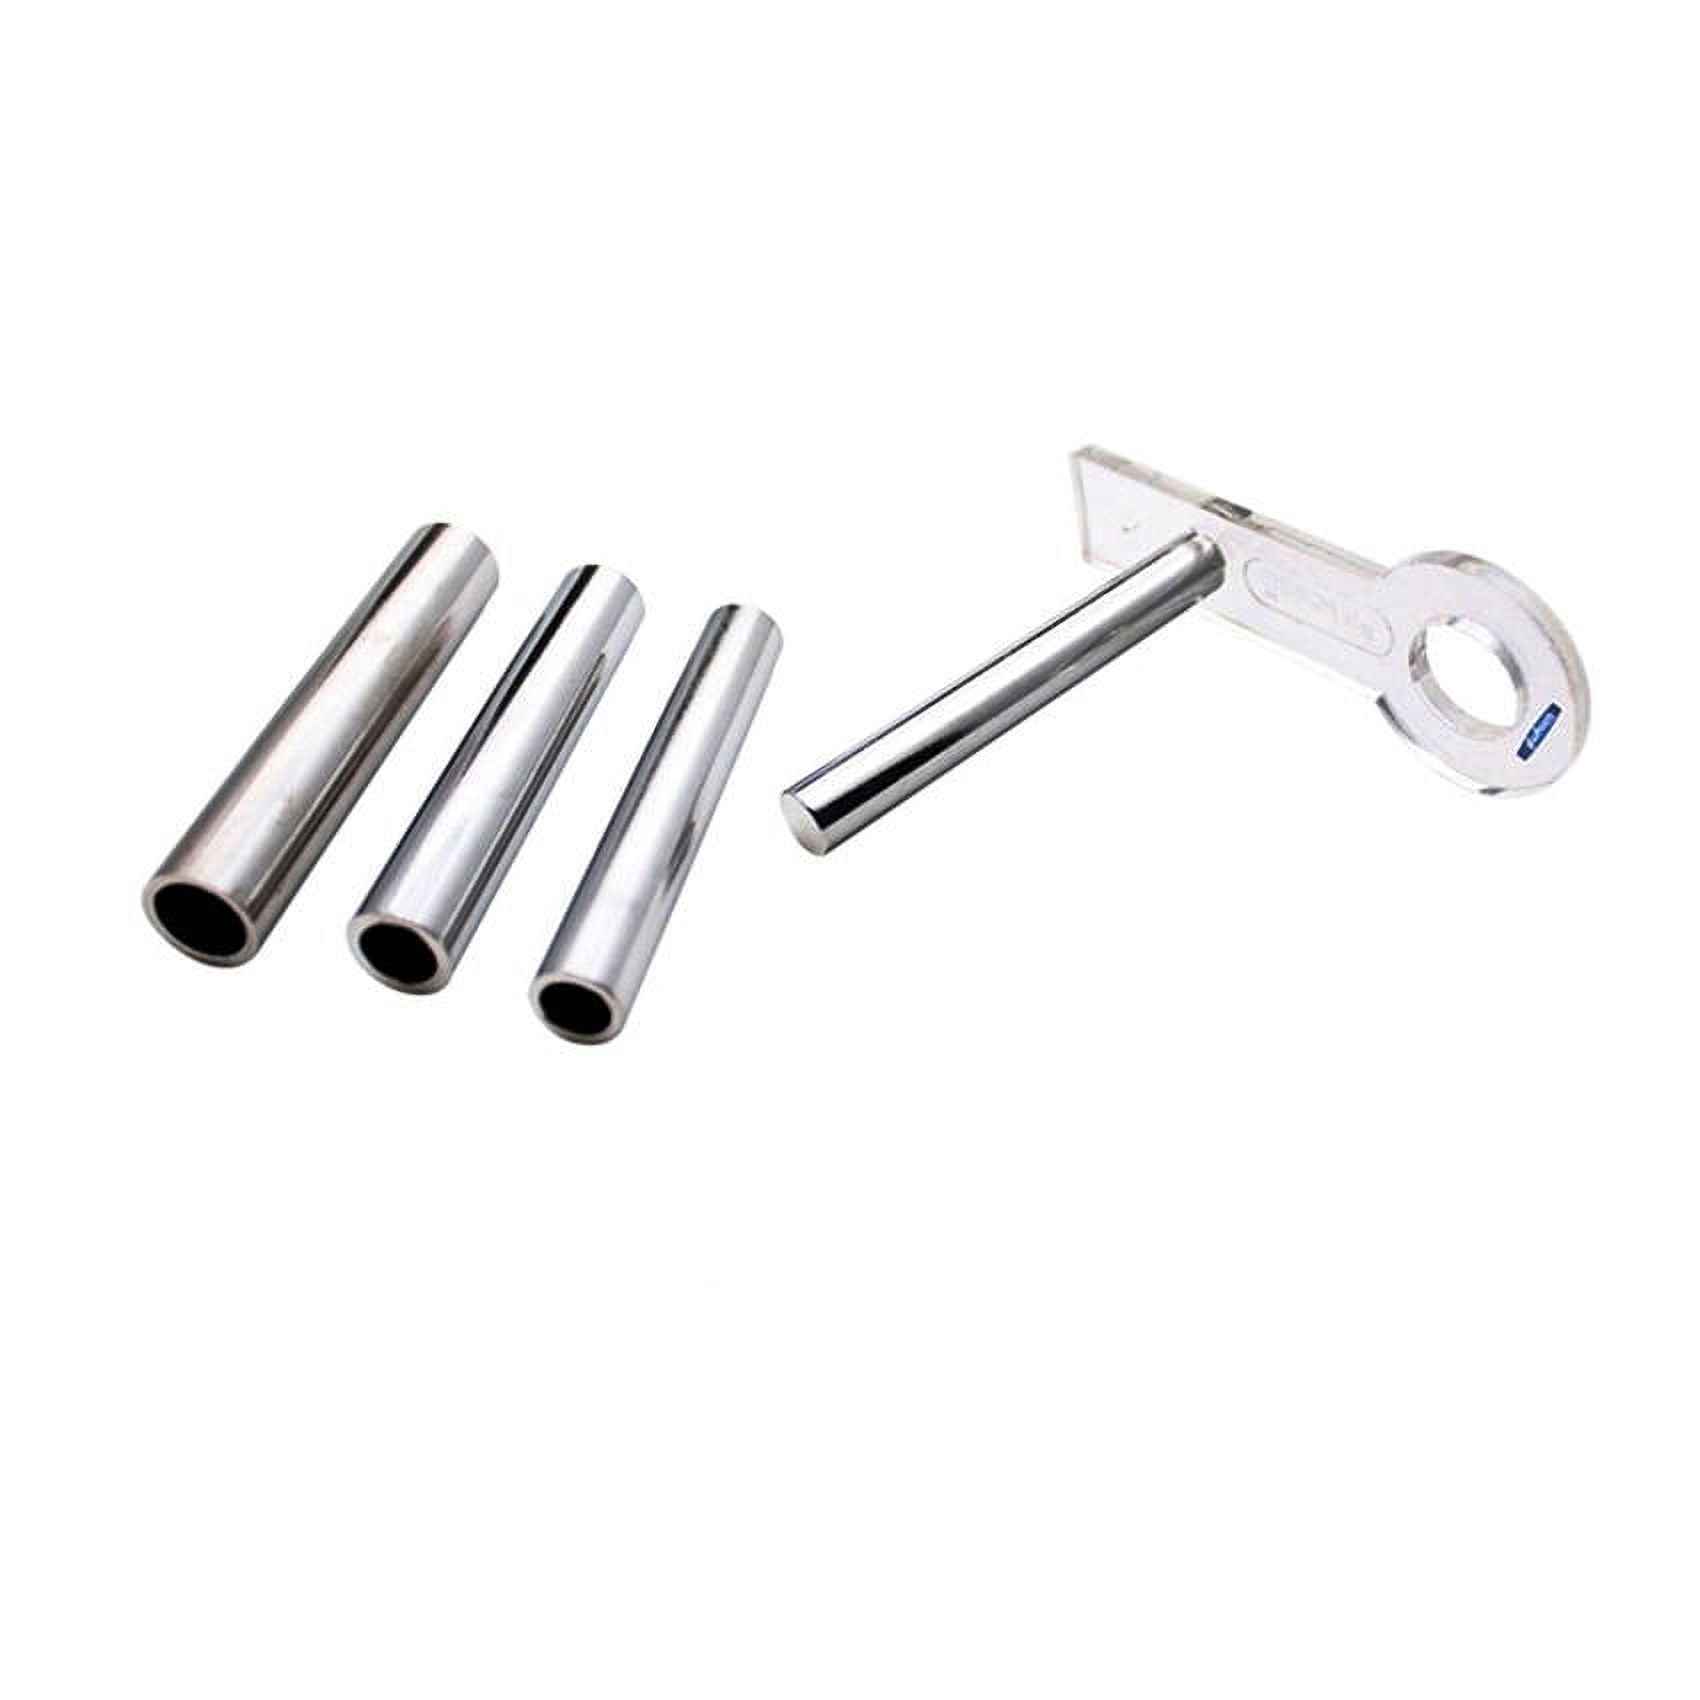 Jump ring maker, steel and plastic, clear, 3-1/2 x 1-1/2 inch base and (4)  3-inch mandrel rods. Sold per 5-piece set. - Fire Mountain Gems and Beads